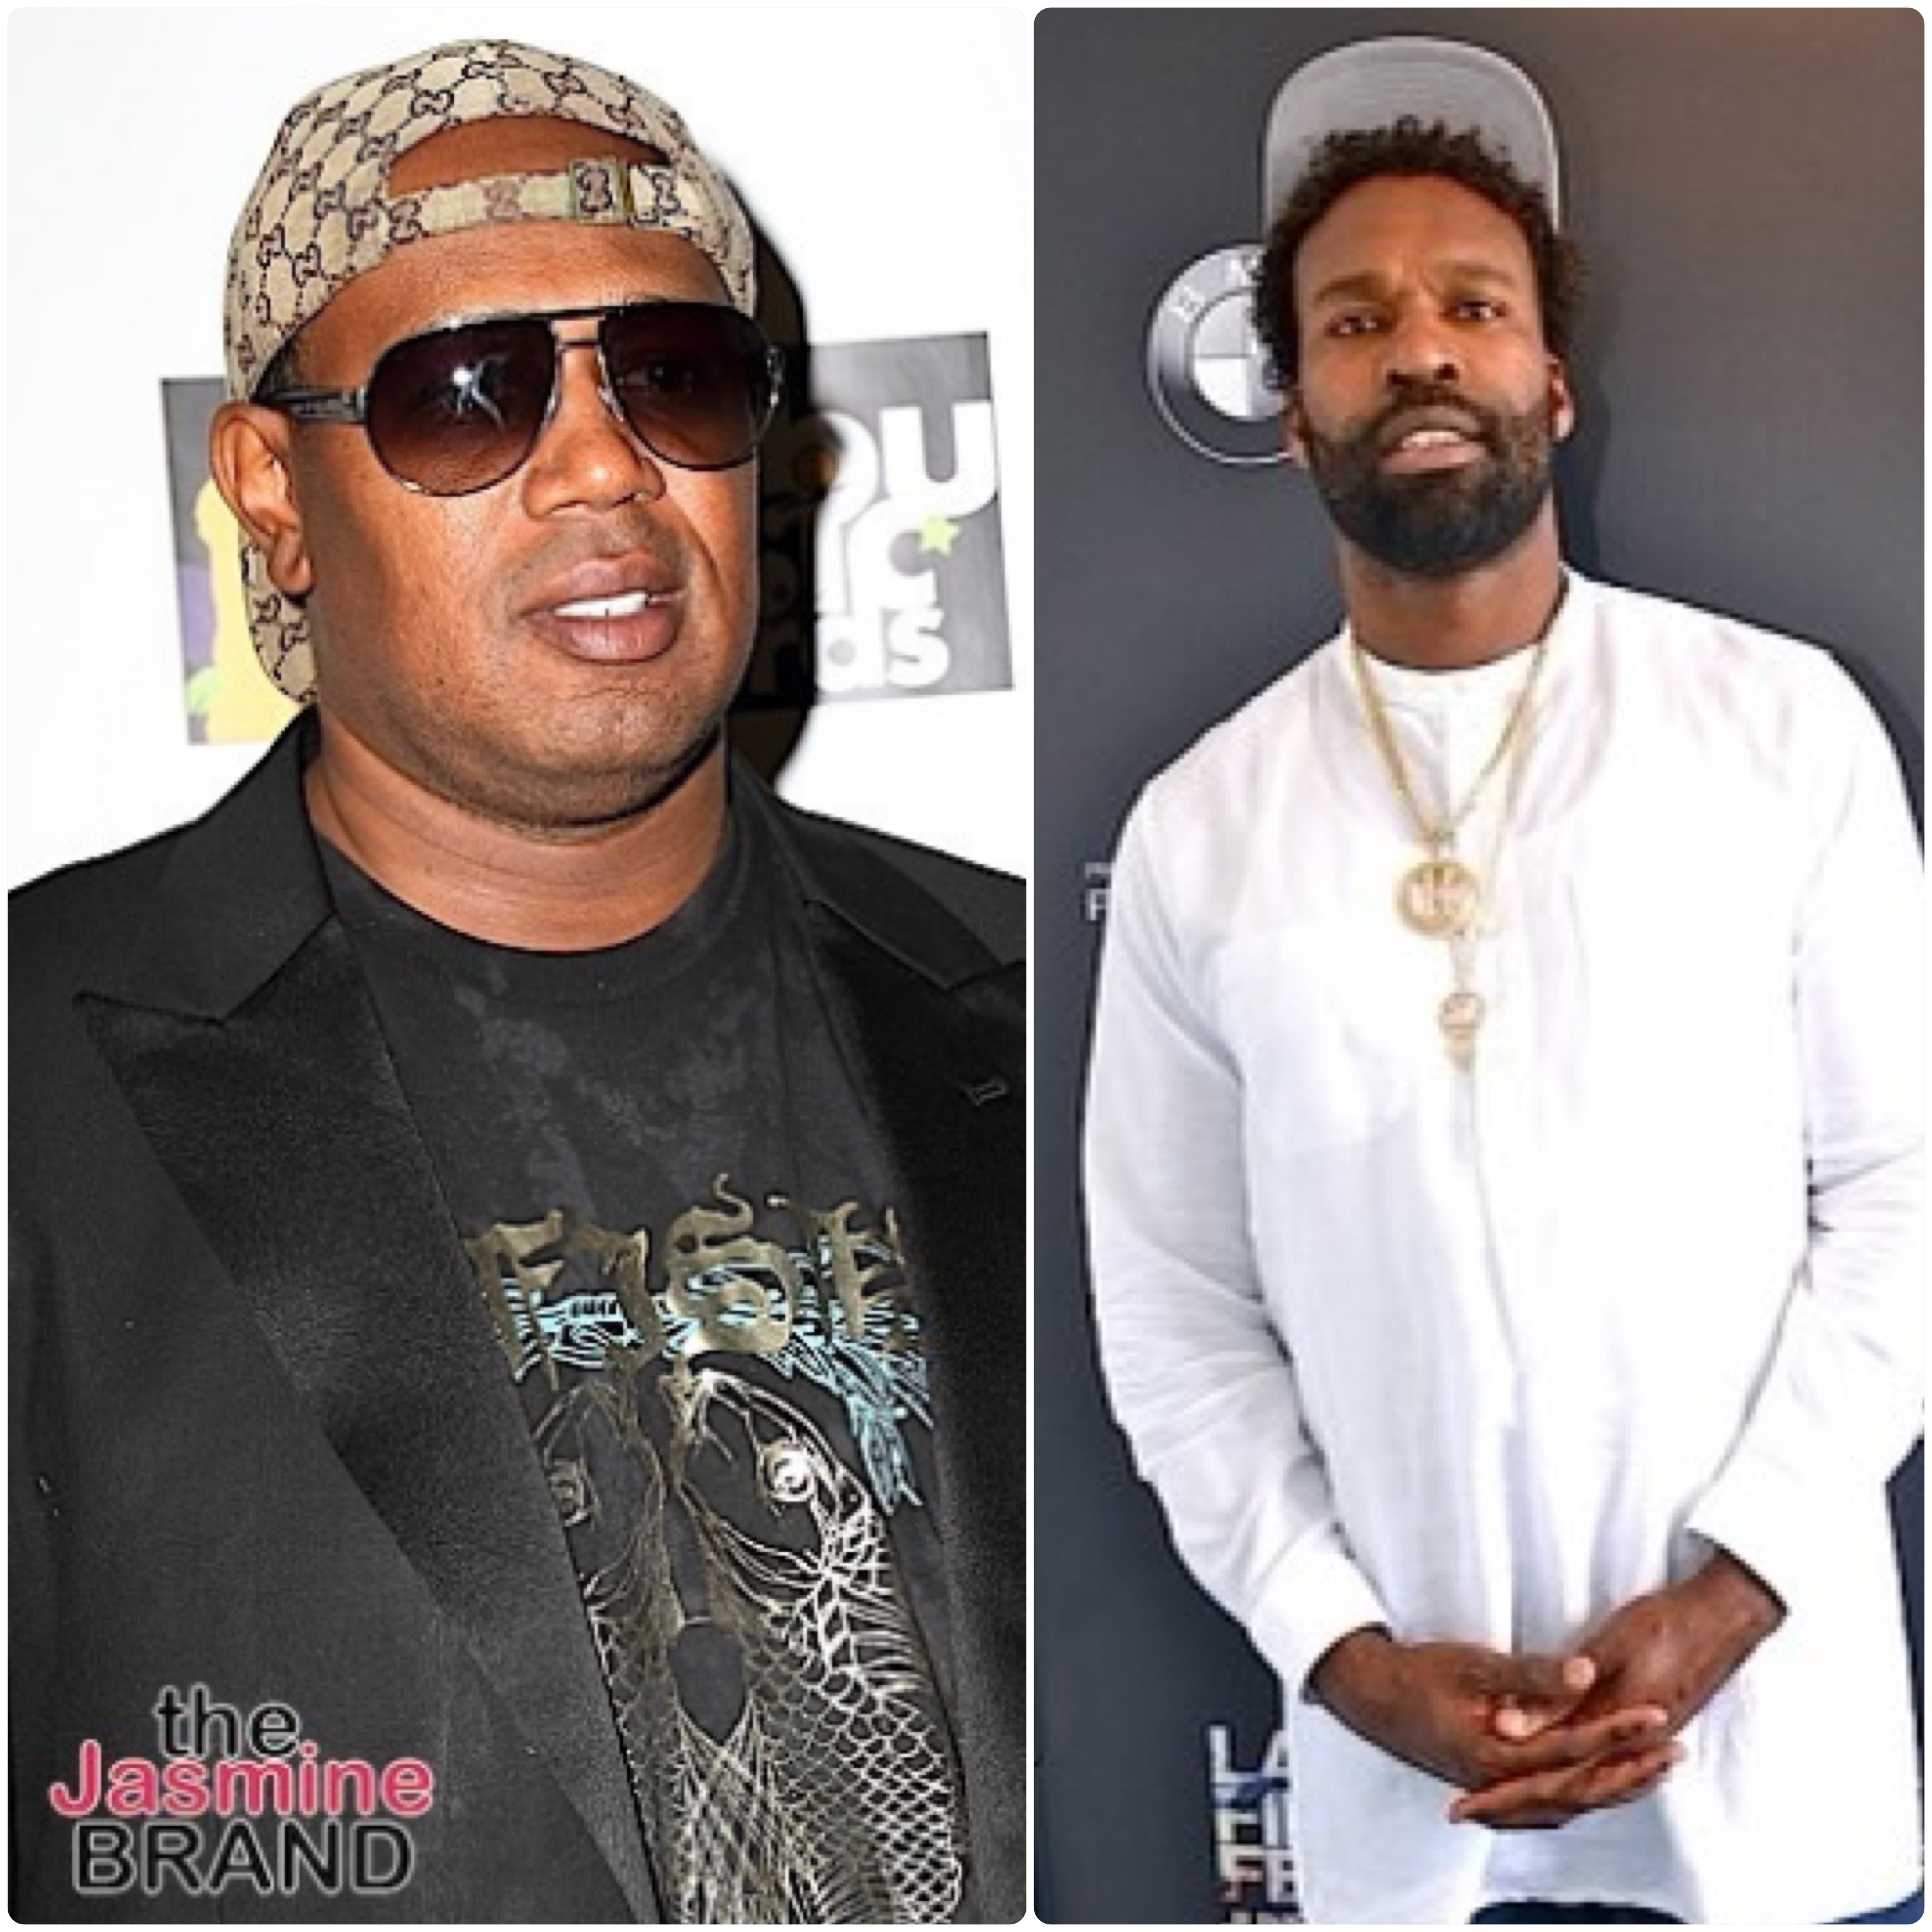 What are Master P and Baron Davis's combined net worth